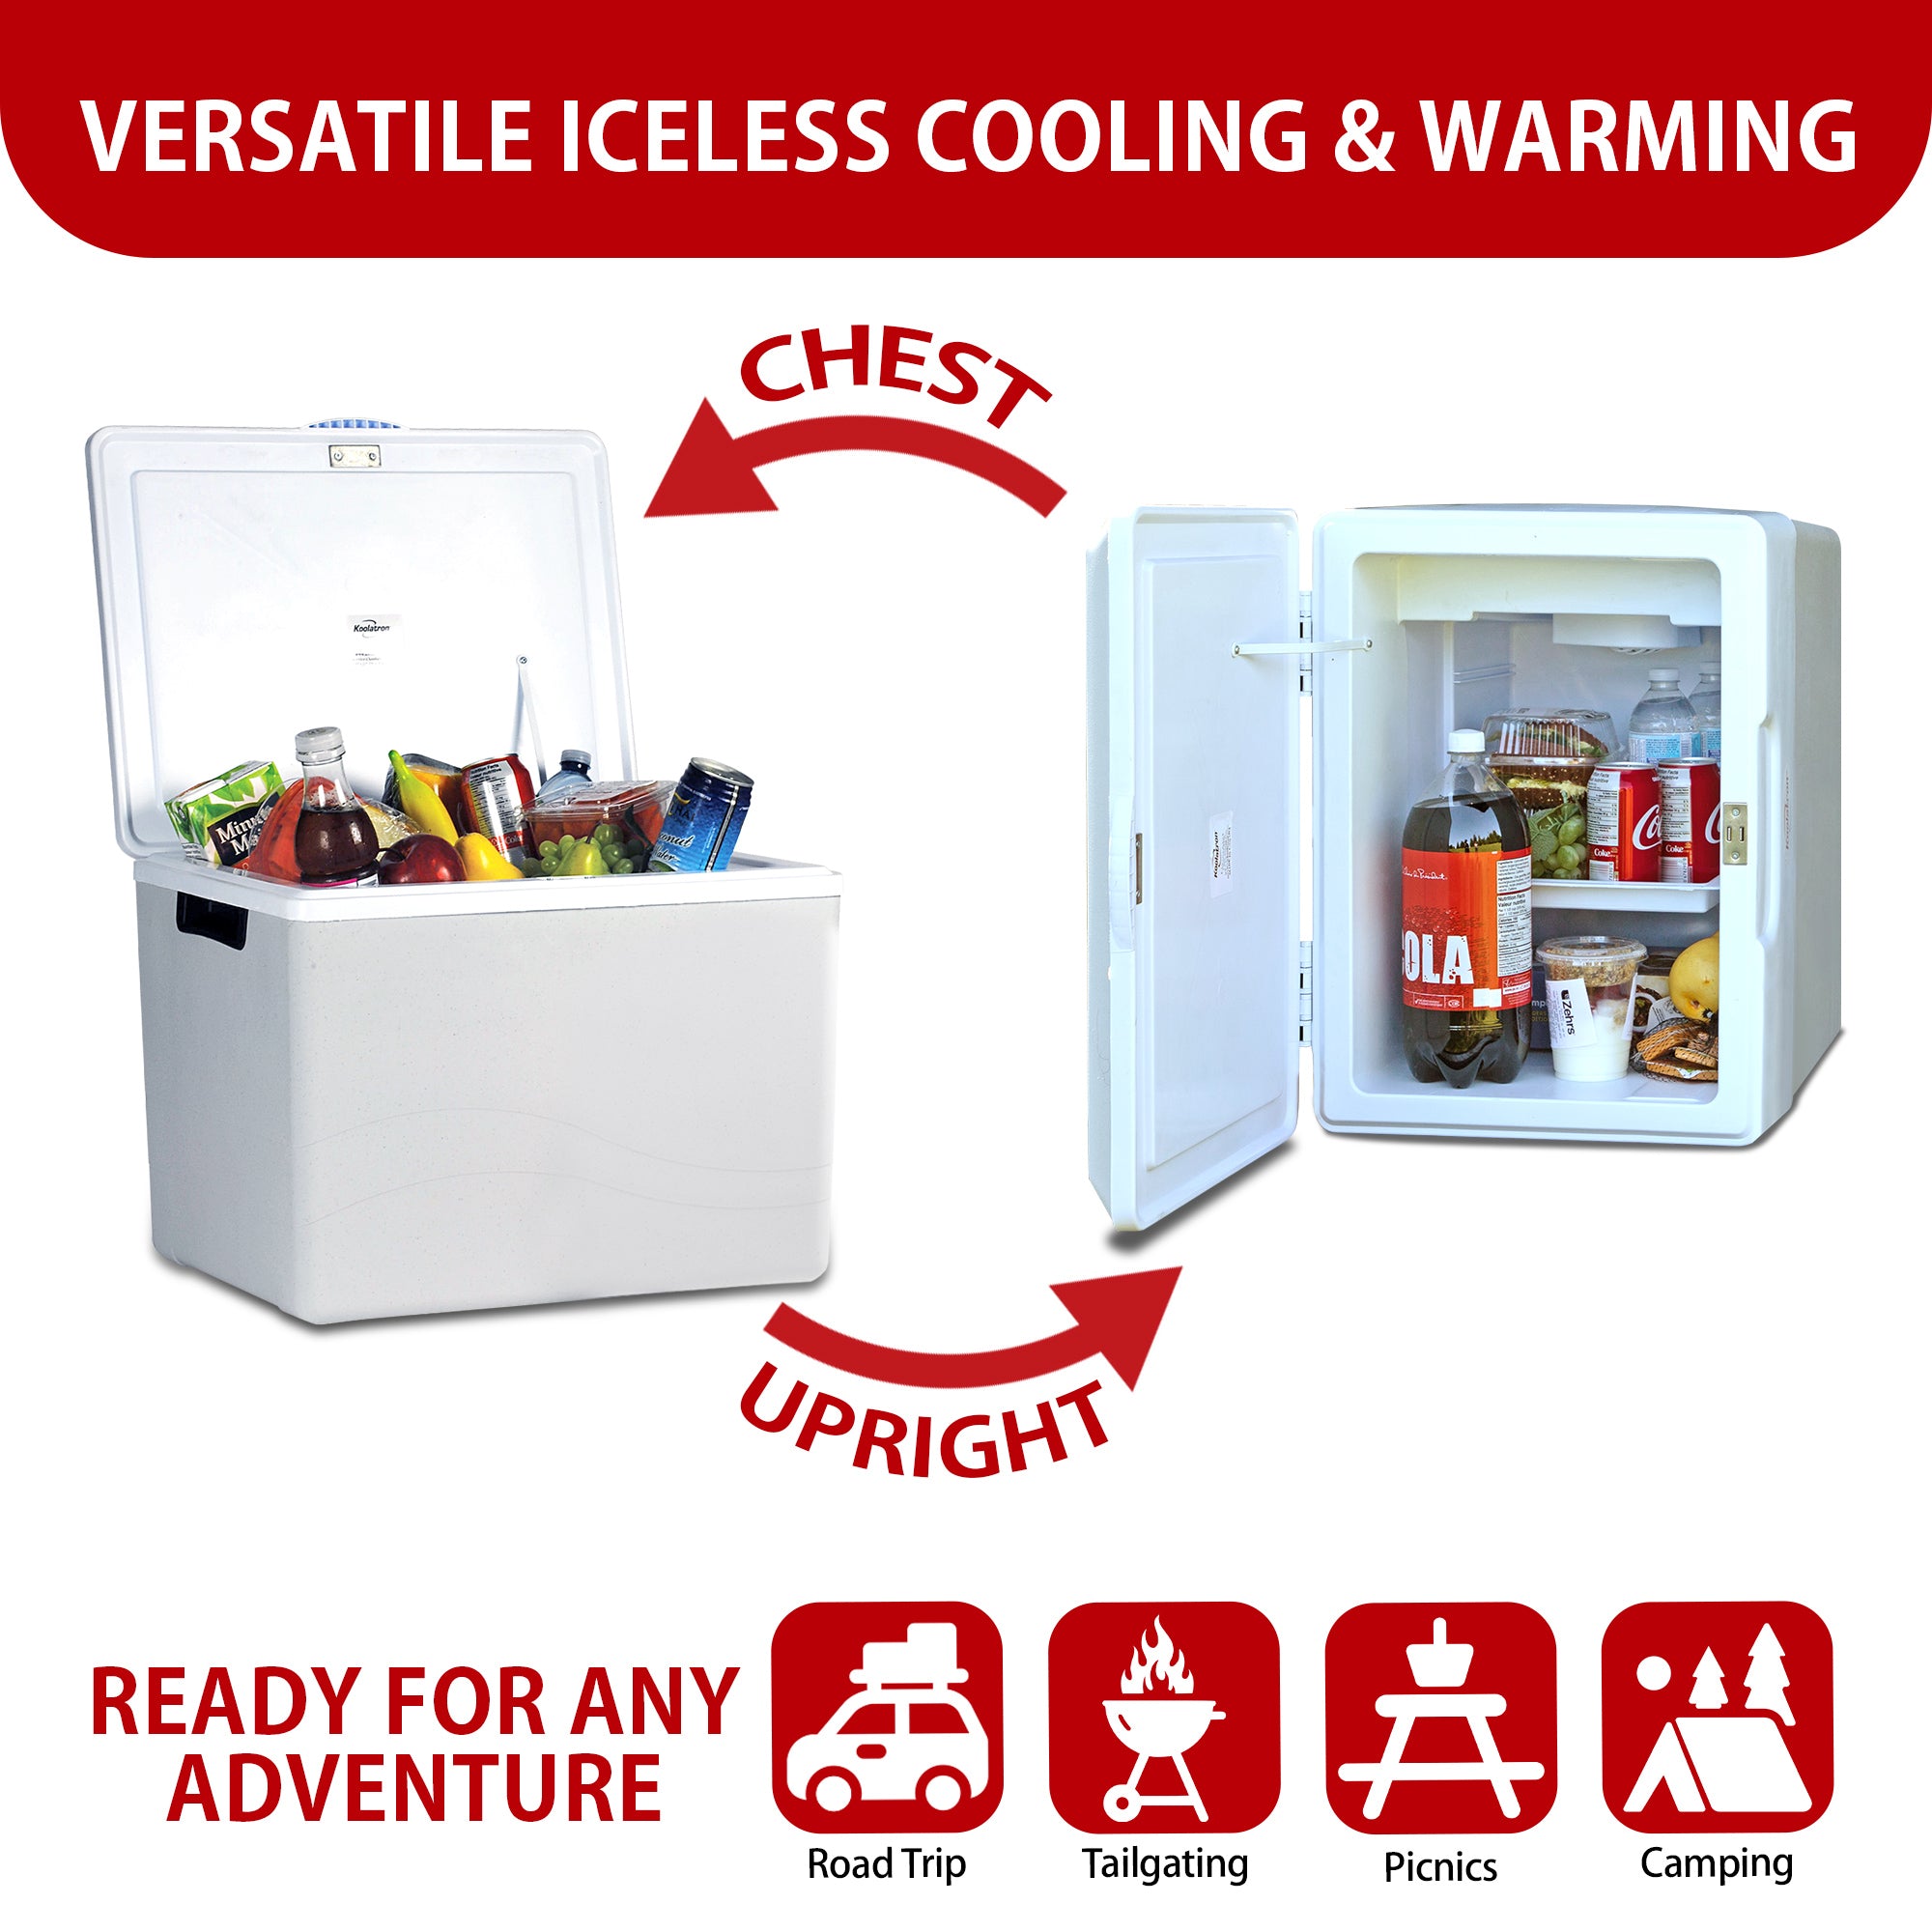 Two images show the Koolatron 12V cooler/warmer as an ice chest and on its side as a mini-fridge with arrows labeled, "CHEST" and "UPRIGHT." Text above reads, "VERSATILE ICELESS COOLING & WARMING." Text below reads, "READY FOR ANY ADVENTURE" followed by icons labeled: Road trip, tailgating, picnics, and camping.